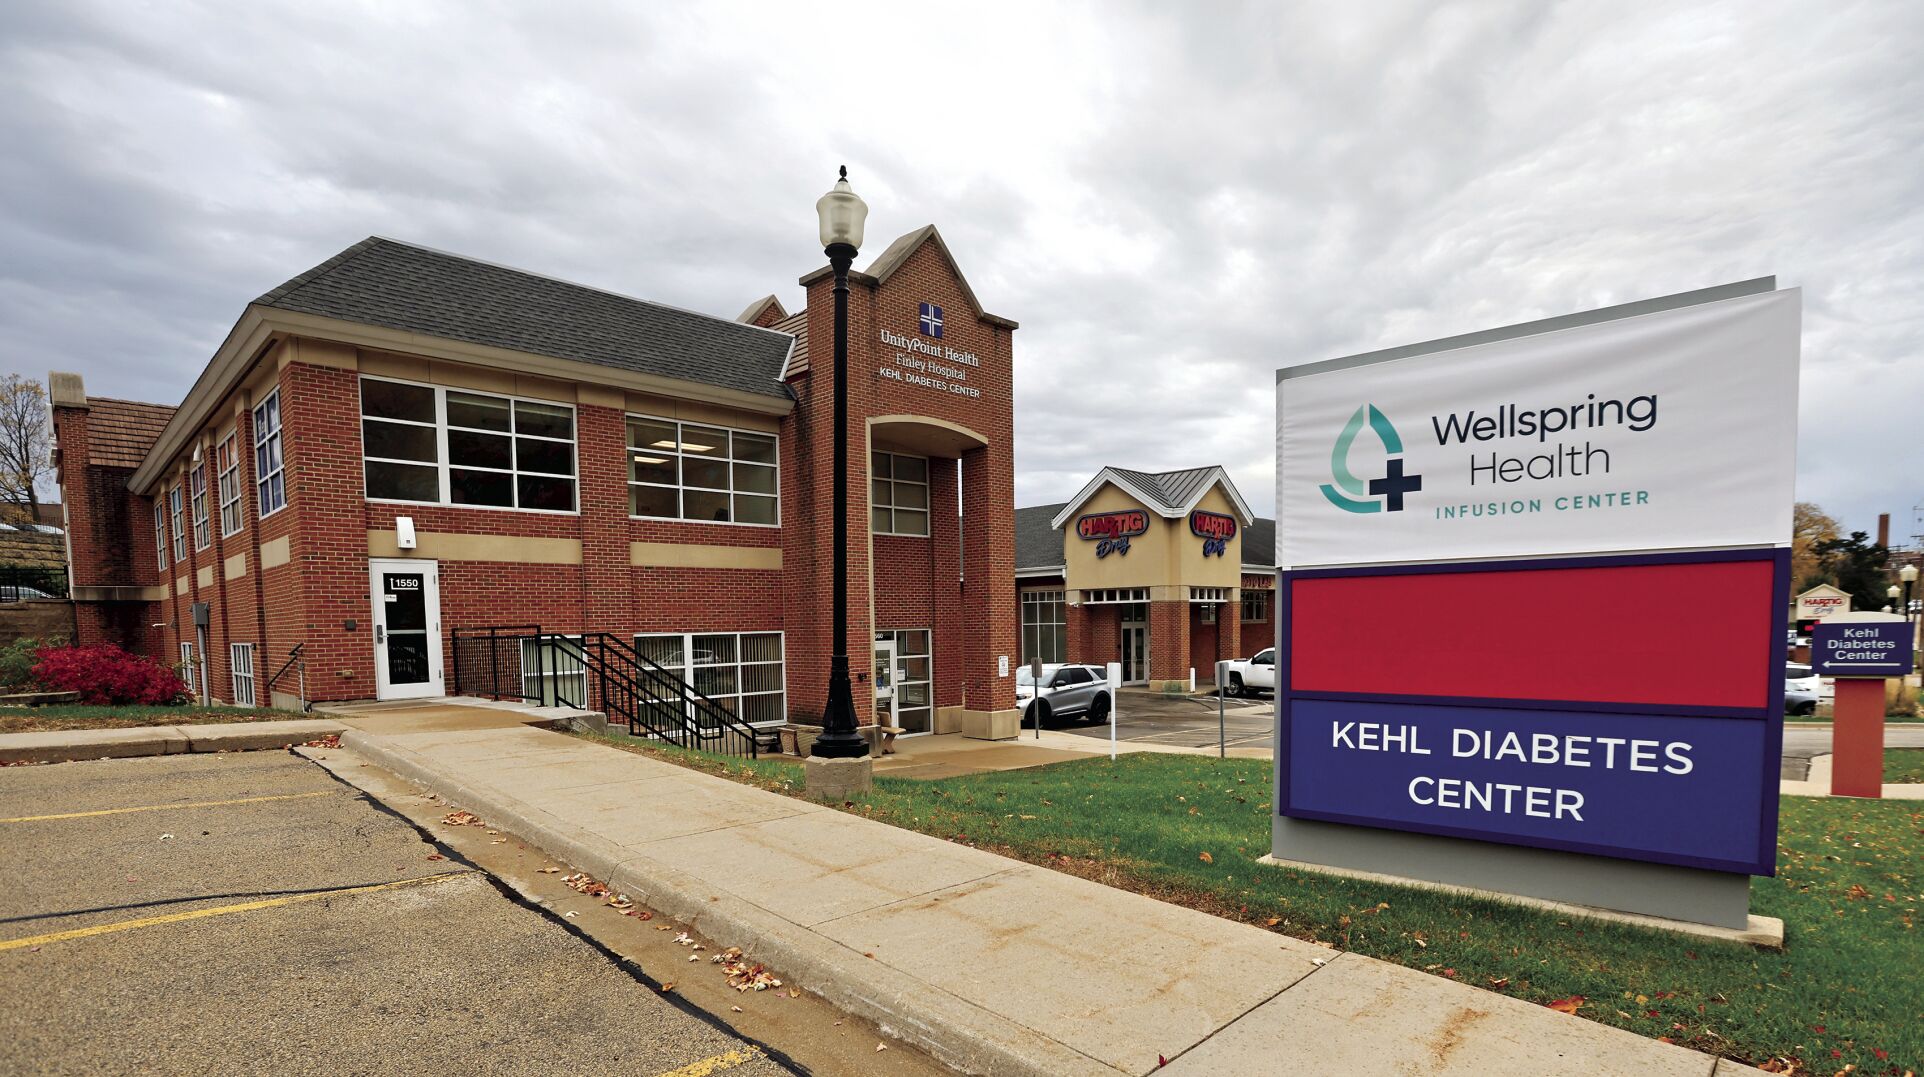 Wellspring Health infusion center is located at 1550 University Ave. in Dubuque.    PHOTO CREDIT: JESSICA REILLY